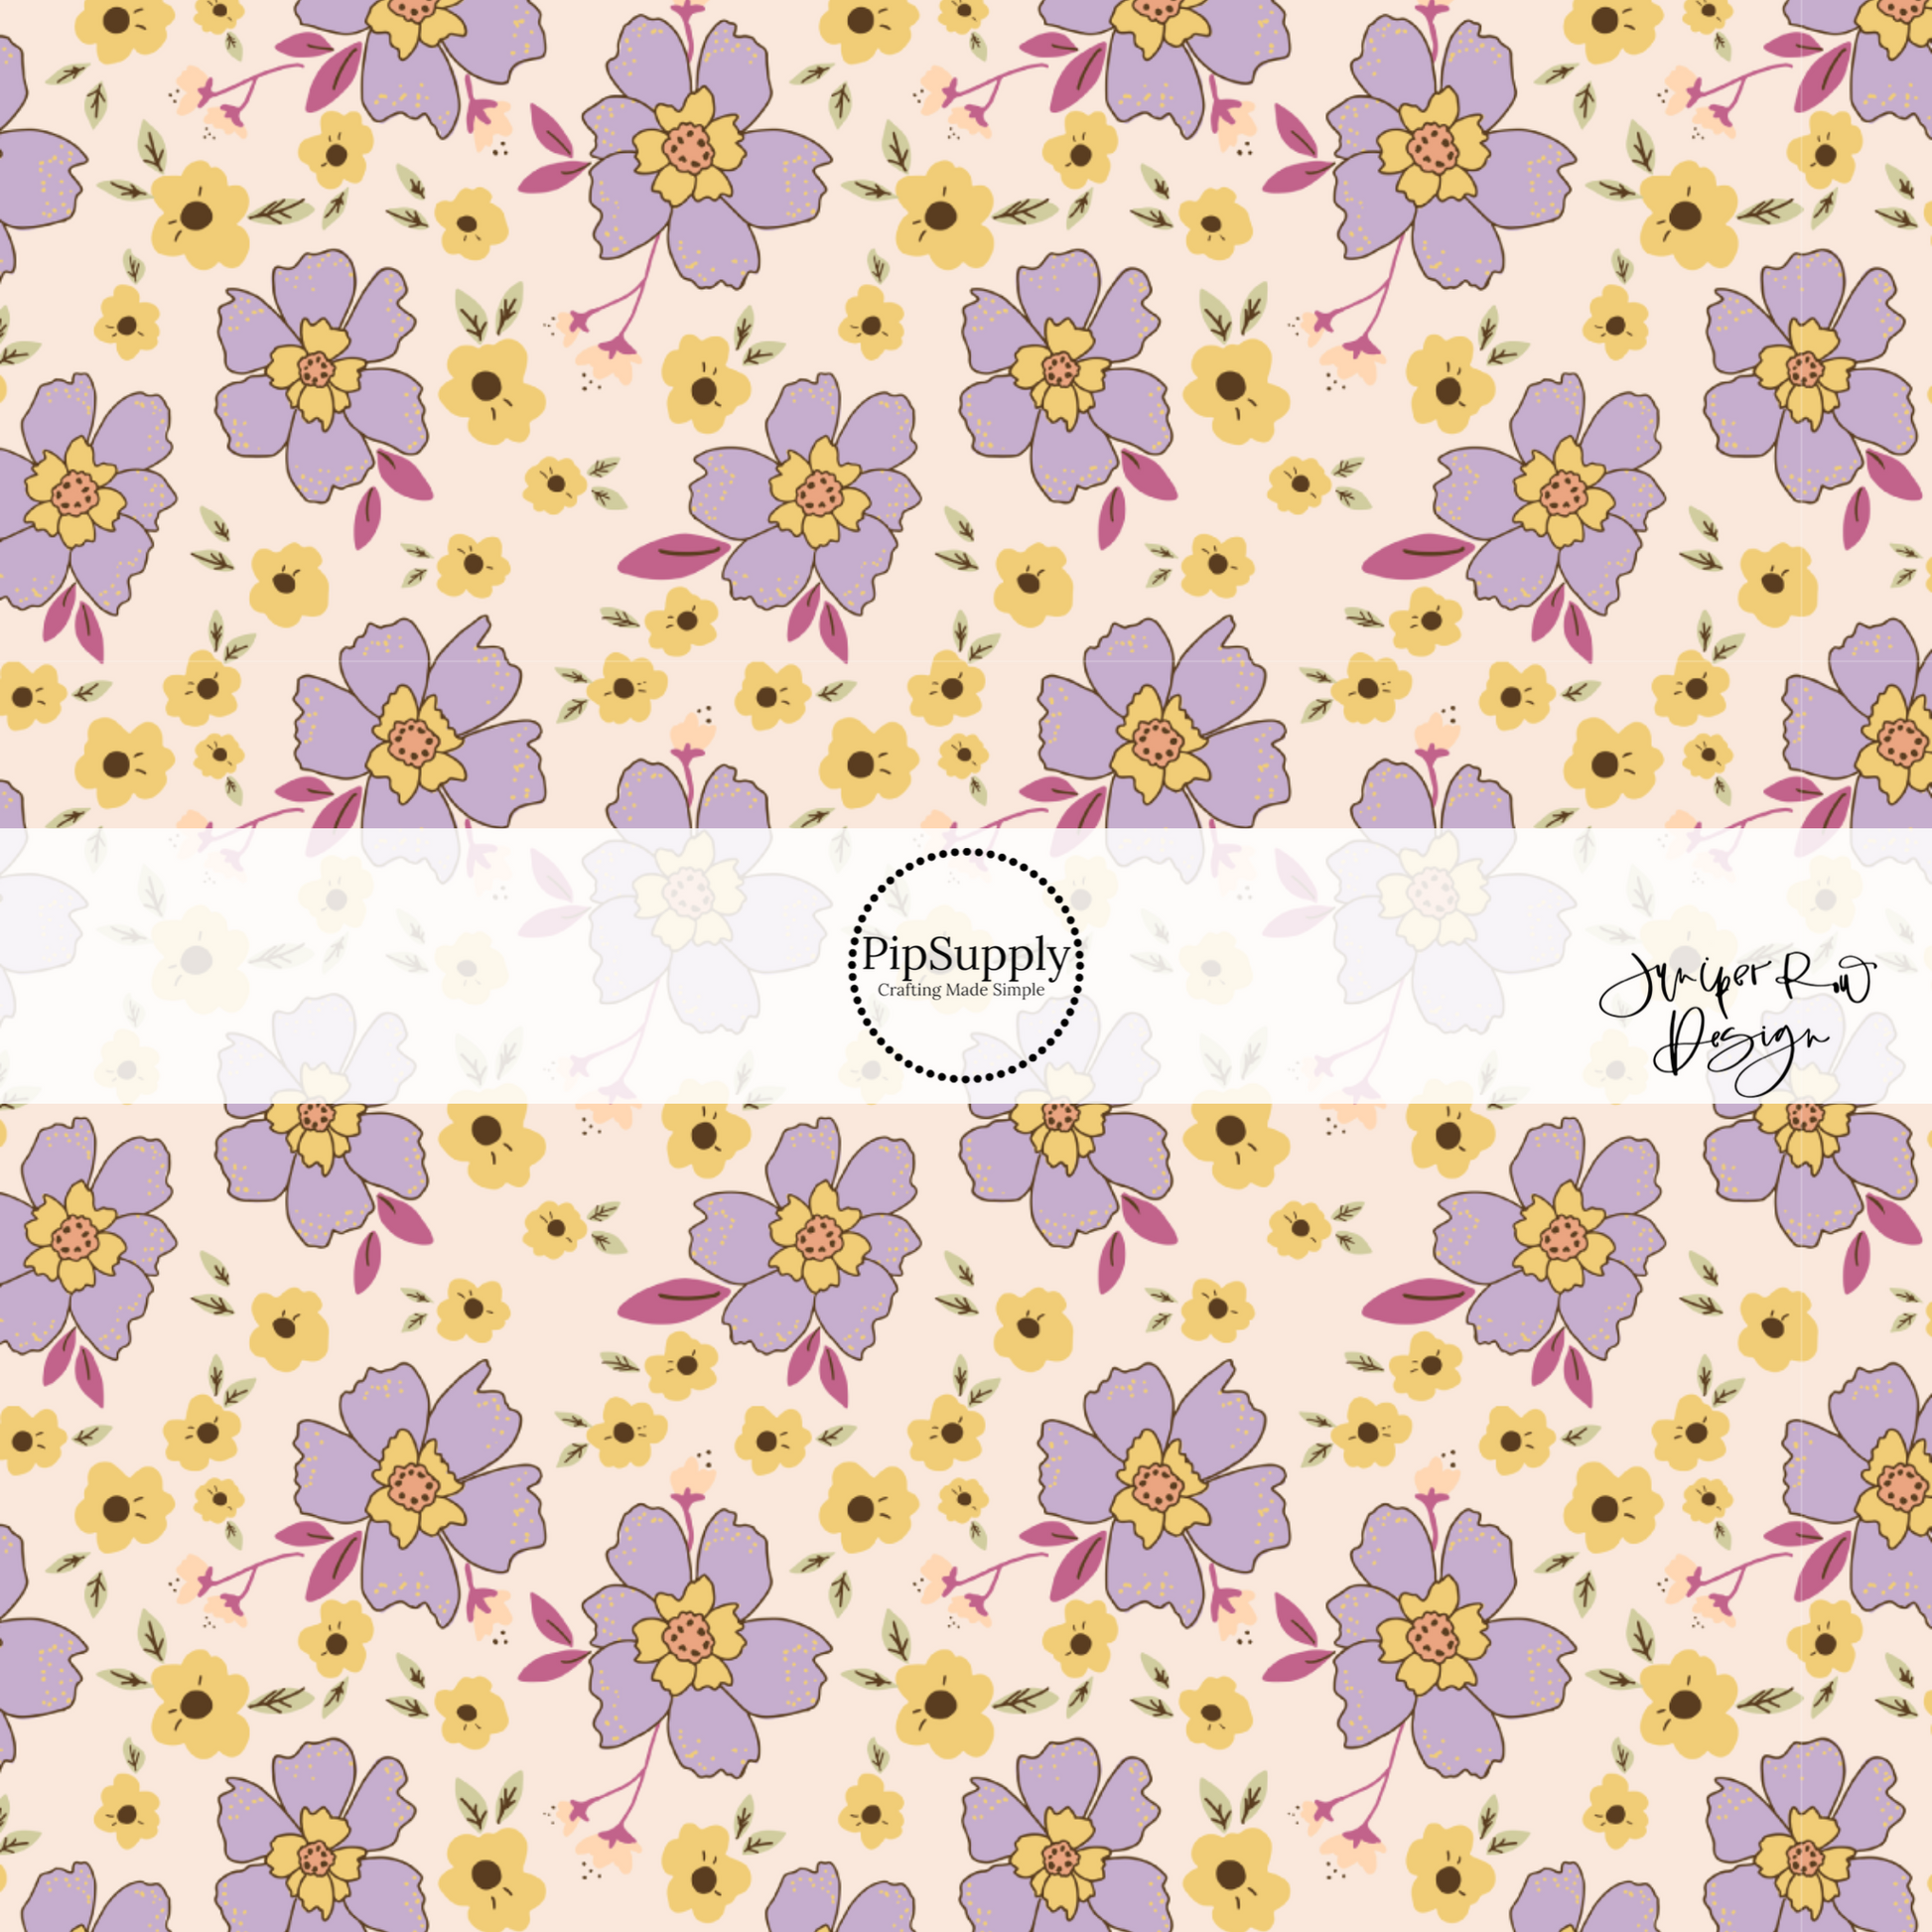 Cream/ Light Pink Fabric by the yard with purple flowers and yellow flowers fabric by the yard - Easter Spring Floral Fabric 